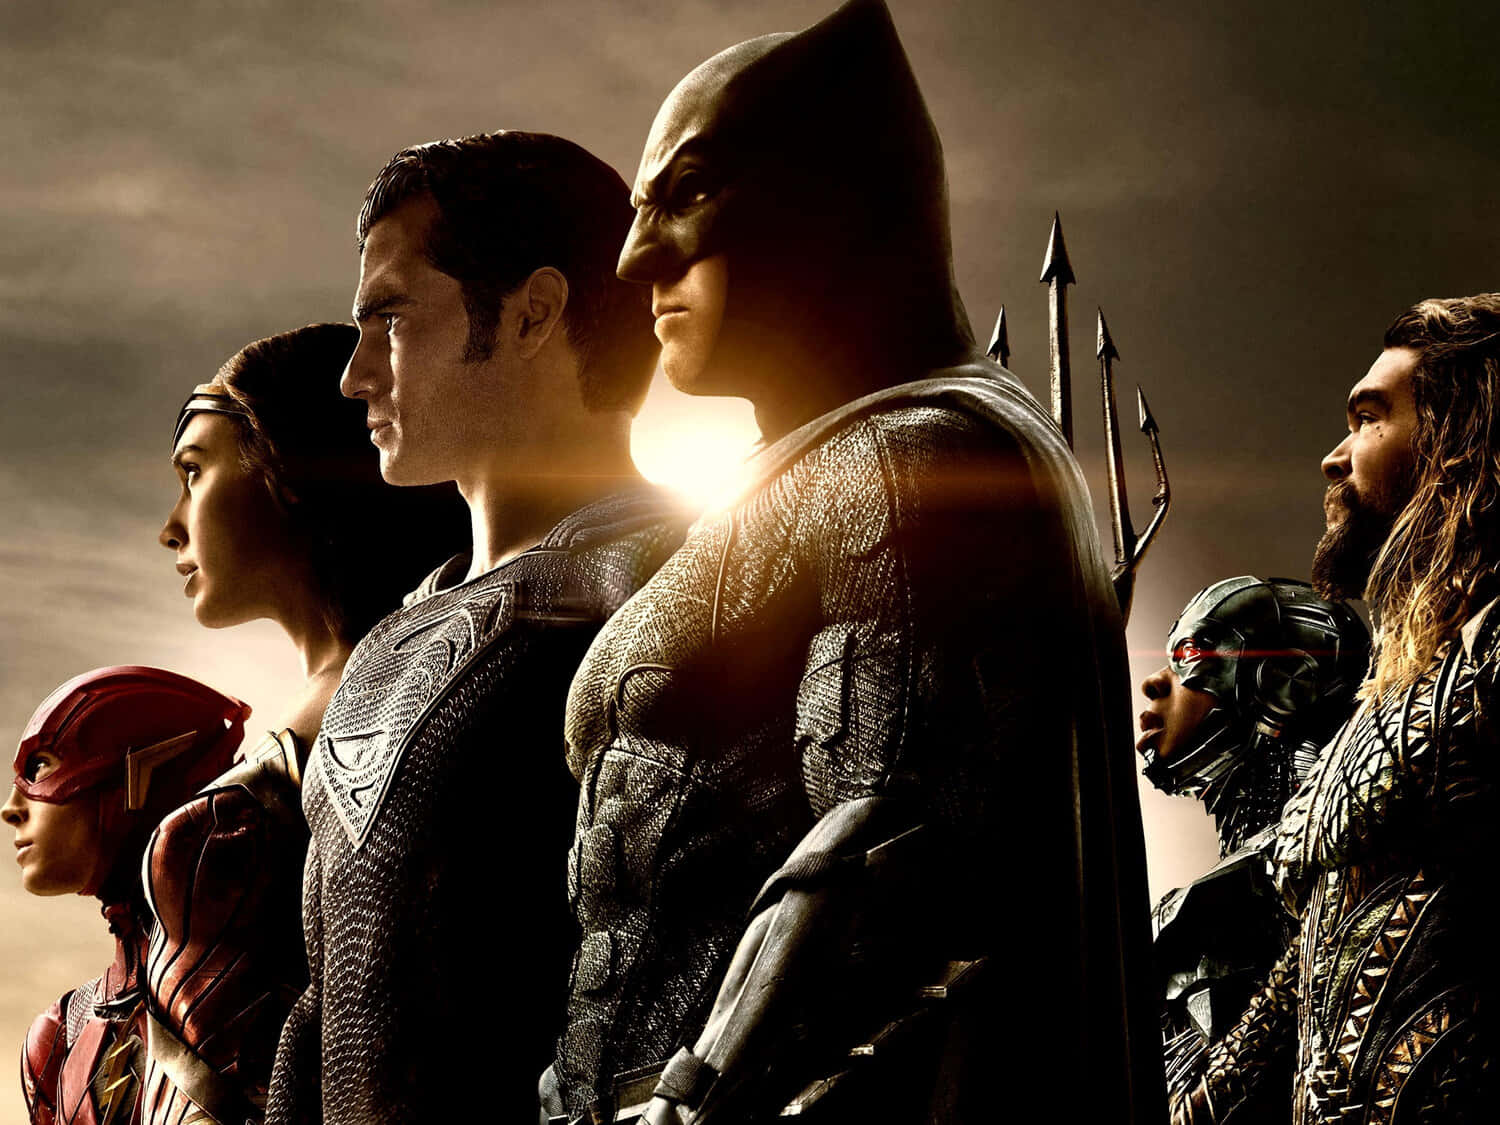 The Justice League Assembled: Heroes United Against Evil